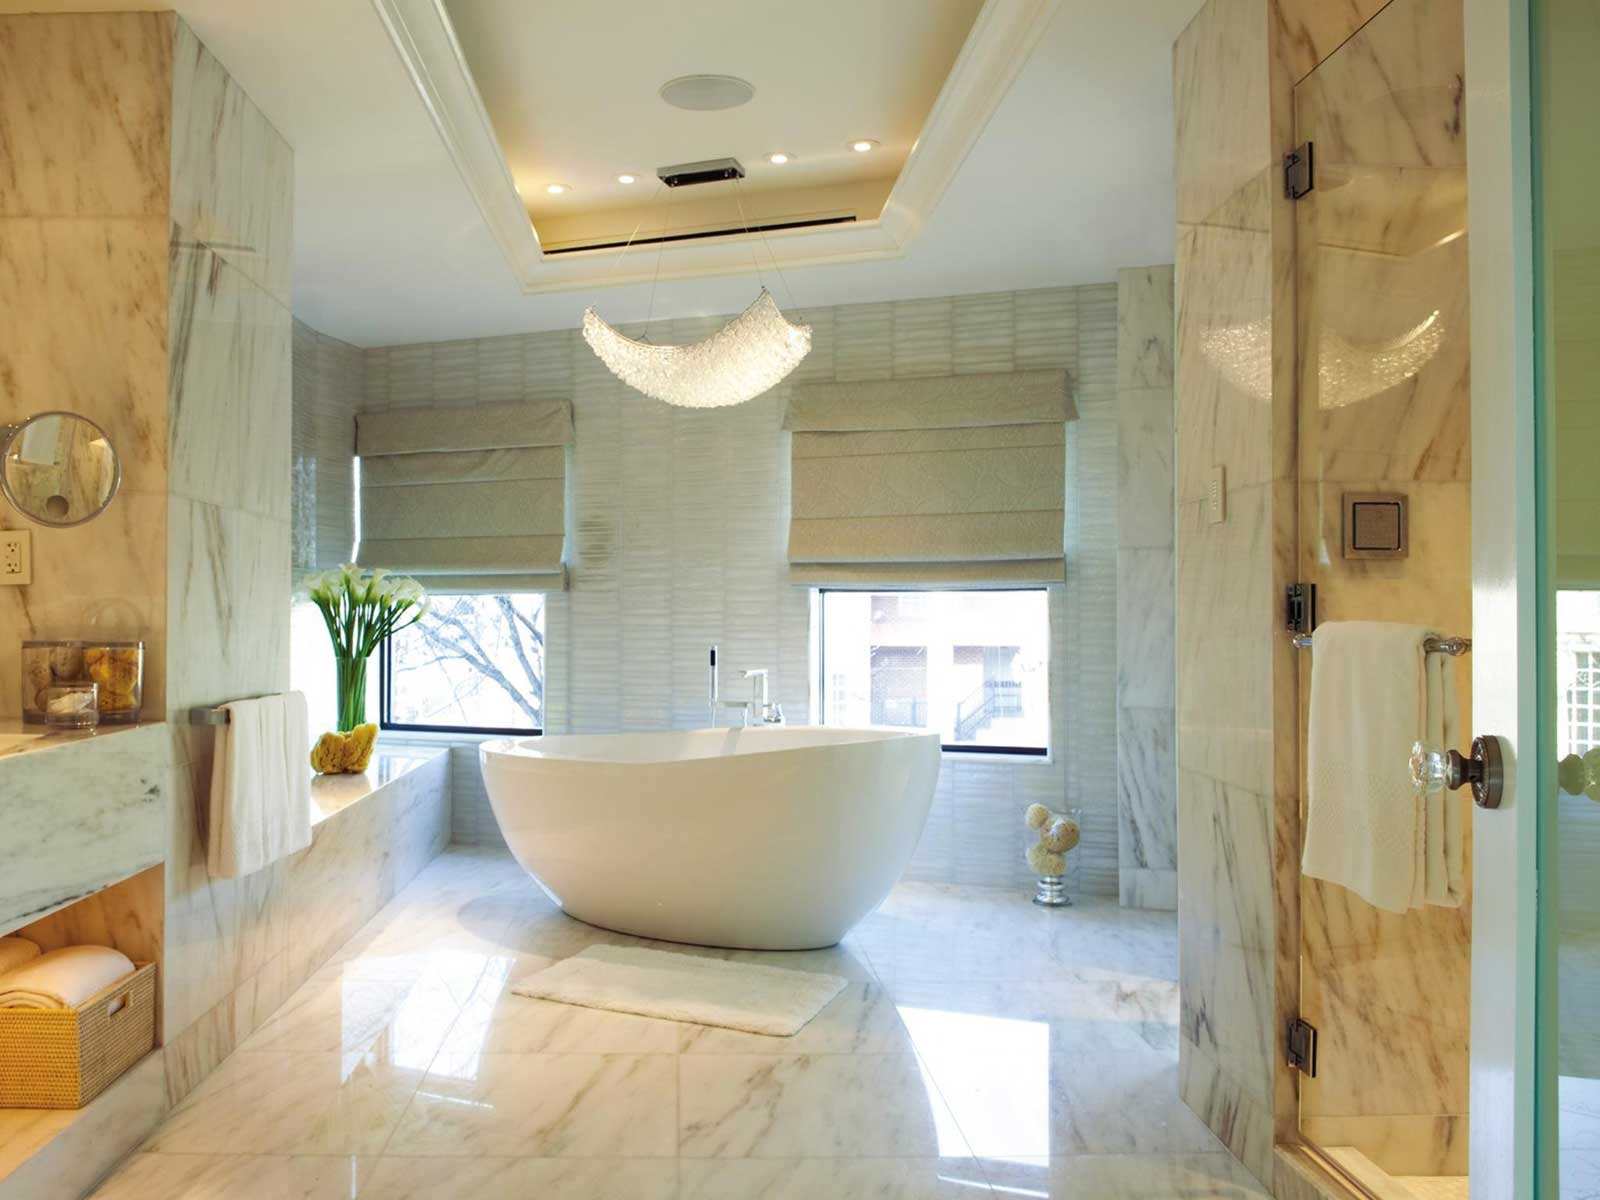 Modern Bathroom Spacious Exciting Modern Bathroom Remodel With Spacious Bathtub Round Models Together With Contemporary Chandelier Bathroom Remodel Idea Along With Colorful Natural Ceramic Design Ideas Bathroom The Most Effective Bathroom Remodel: Toilet And Floor